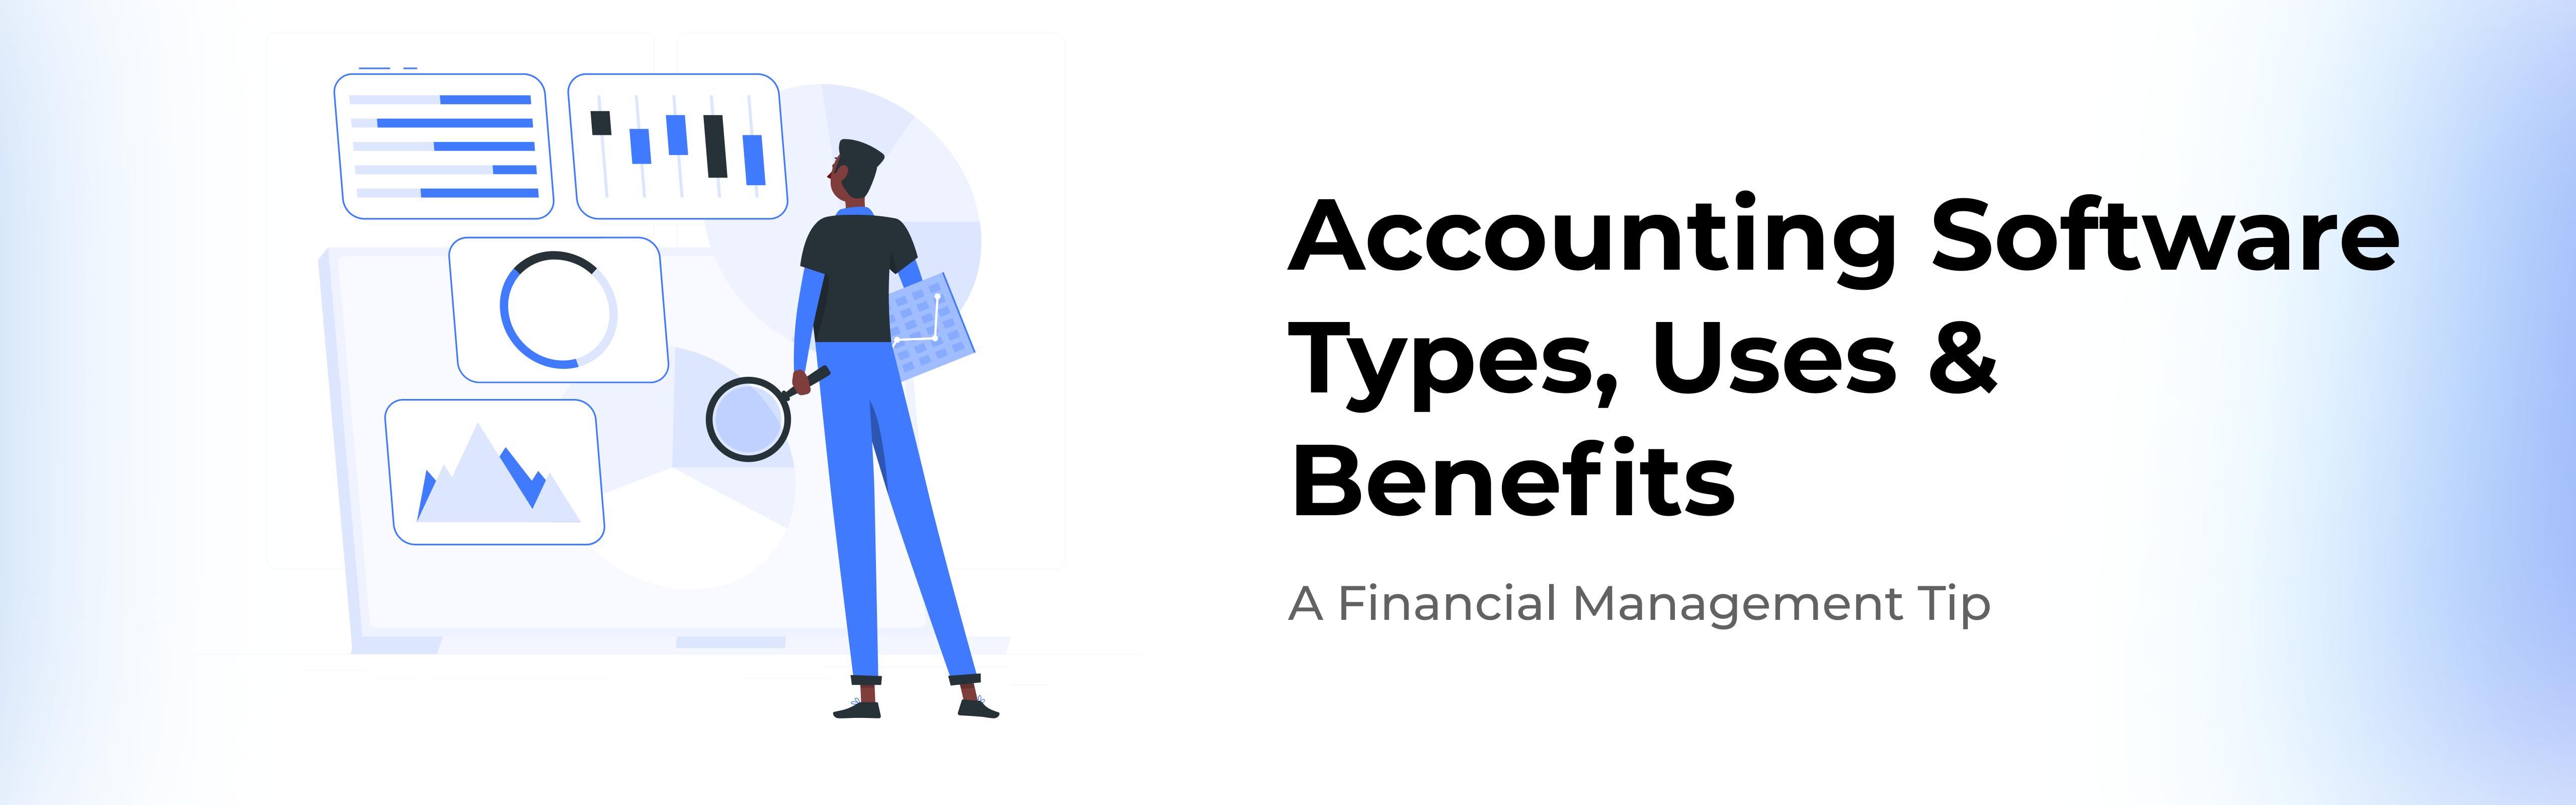 accounting-software-types-uses,benefits